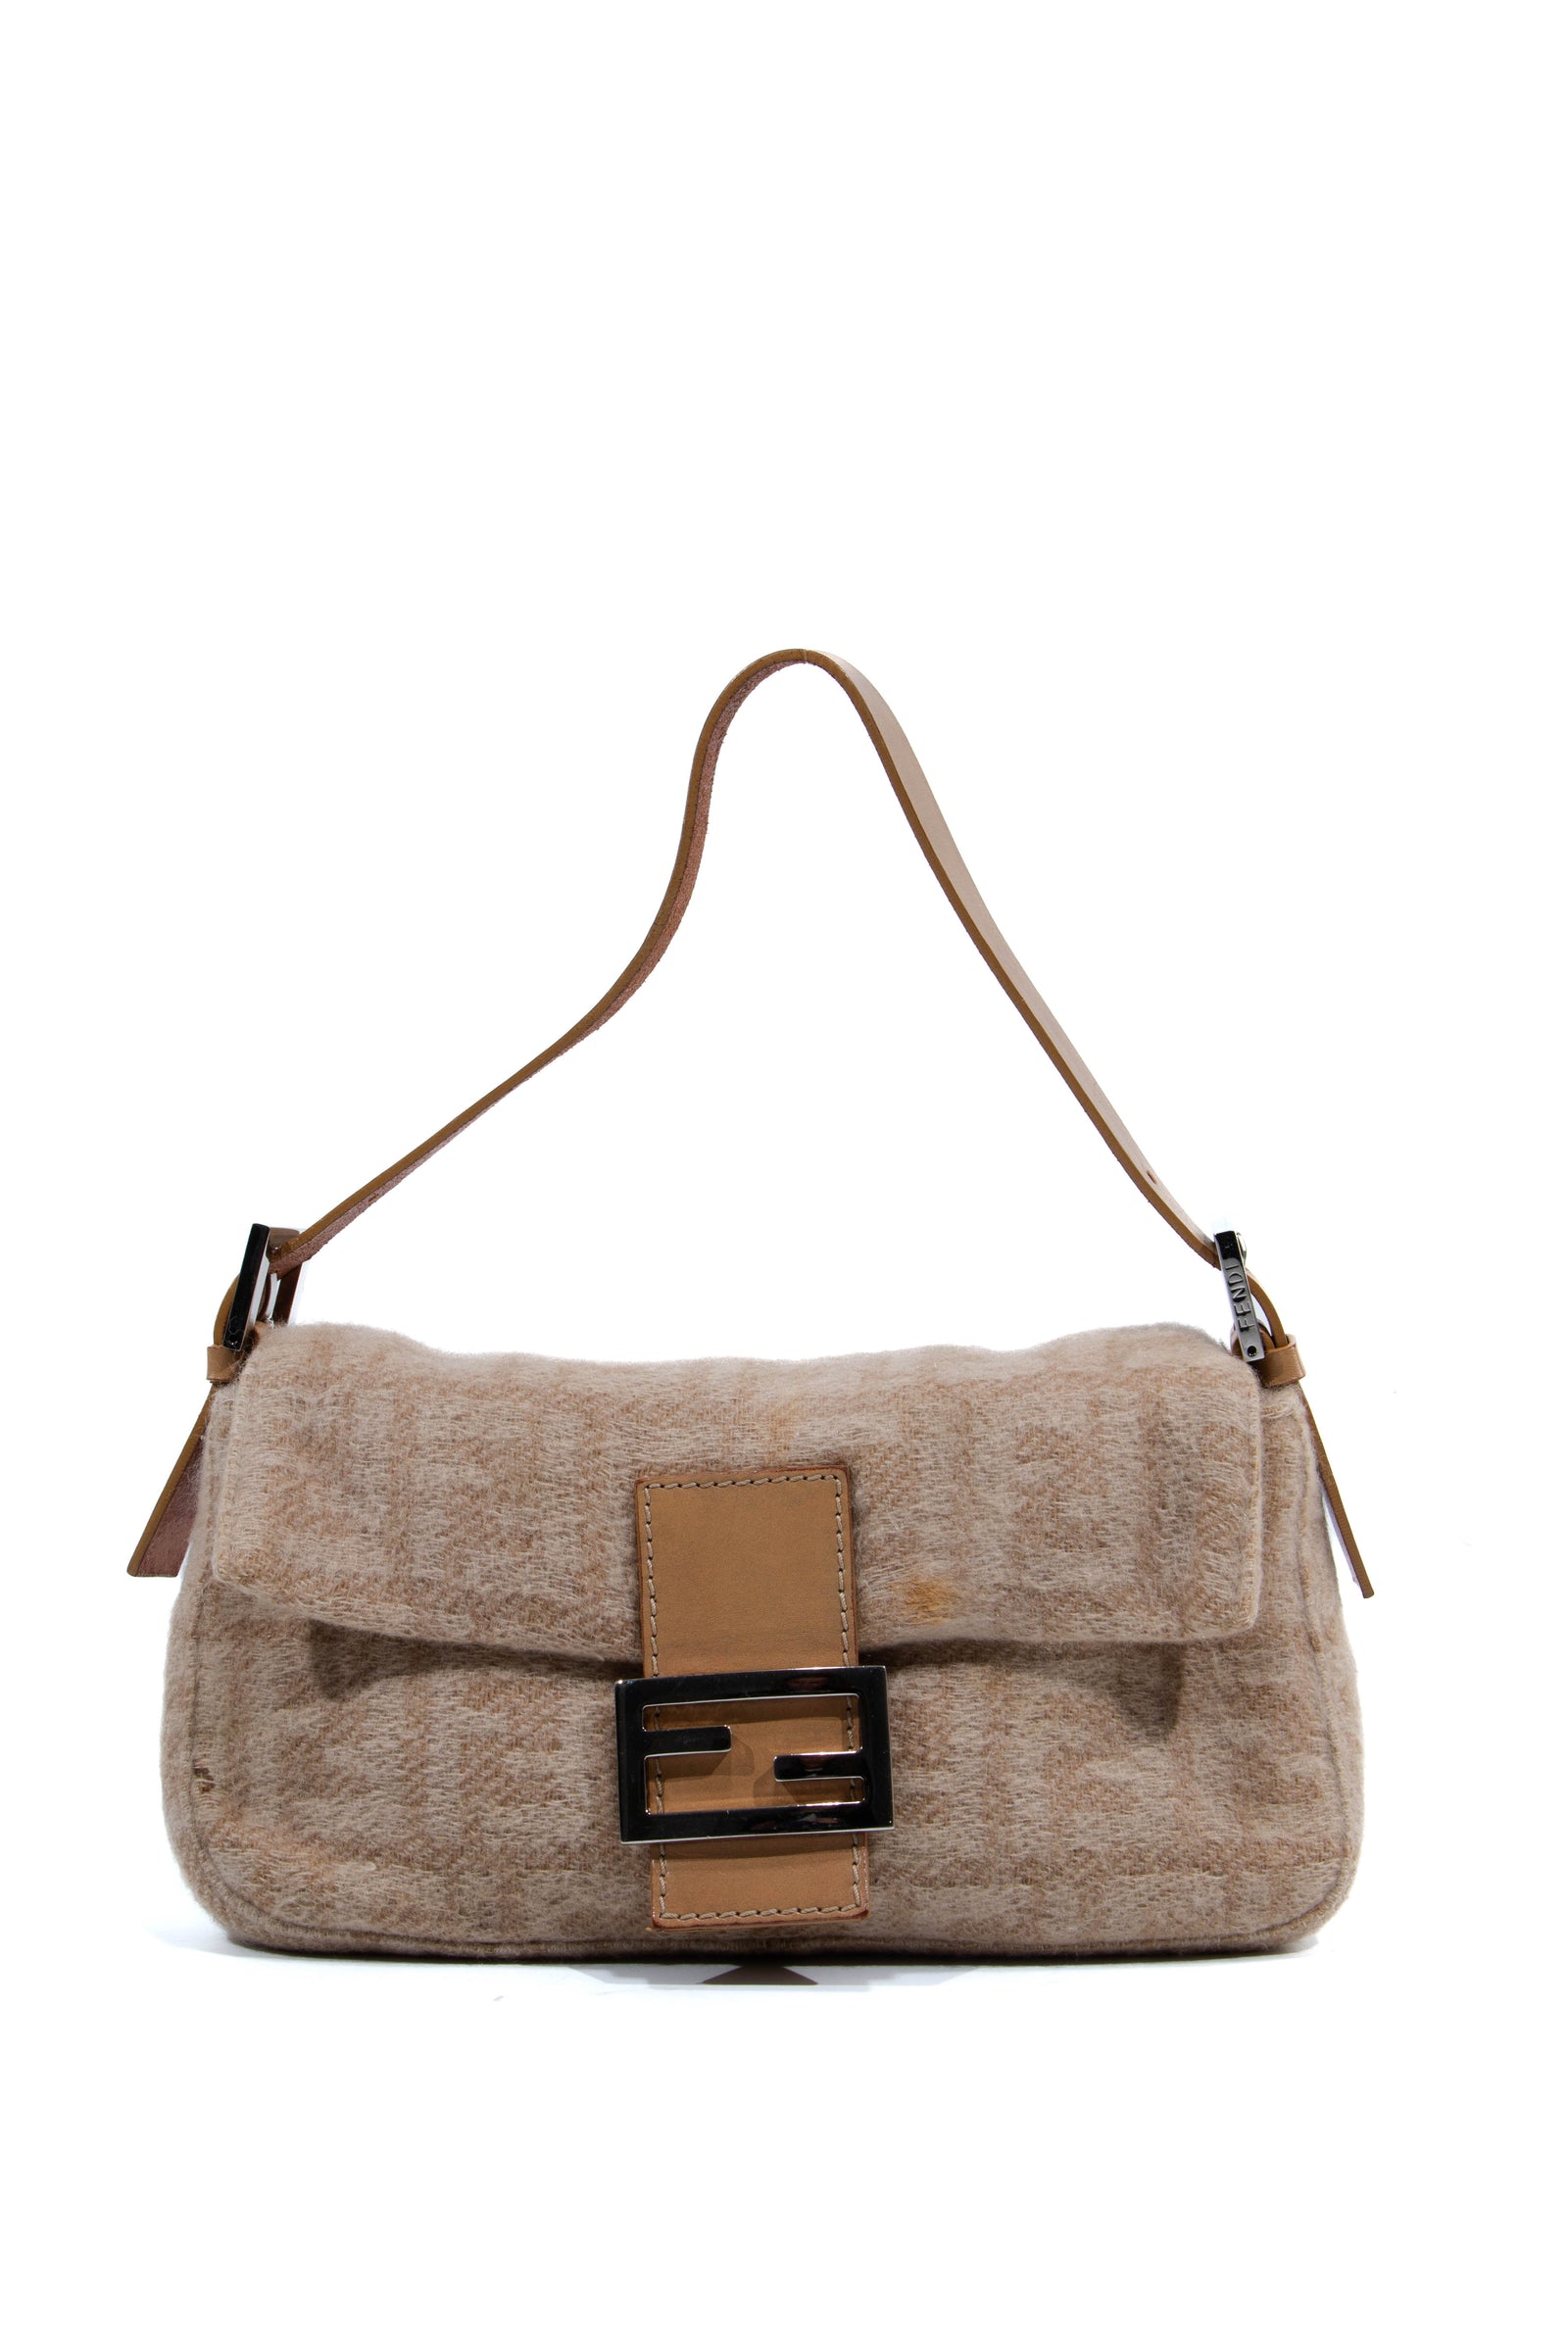 Fendi - Authenticated Croissant Vintage Handbag - Wool Beige For Woman, Very Good condition